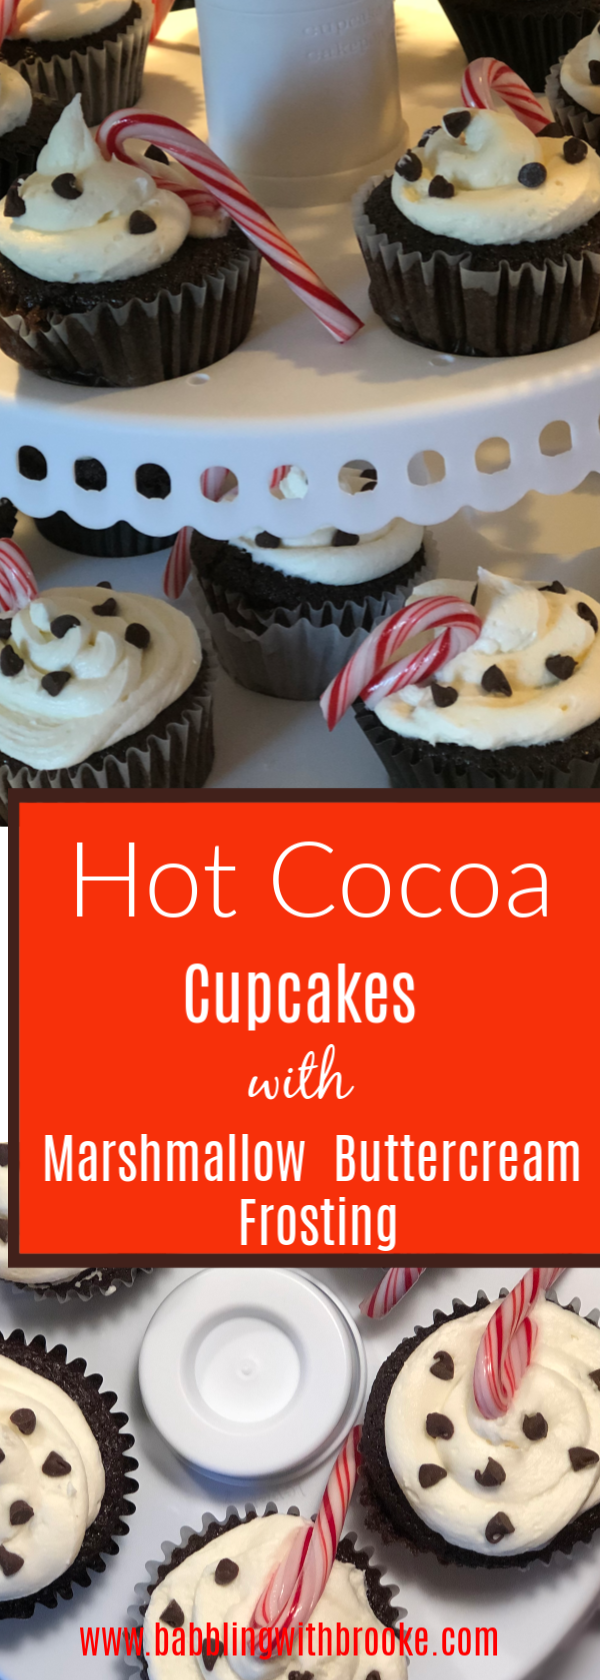 These delicious hot chocolate cupcakes with marshmallow buttercream frosting are what dreams are made of! They are easy to make and perfect for any celbration. Or not, they are so easy to make you can simply make them as a sweet treat! #highaltitudebaking #highaltitudecupcakes #cupcakes #hotchocolatecupcakes #wintercupcakes #sweettreat #easydessert